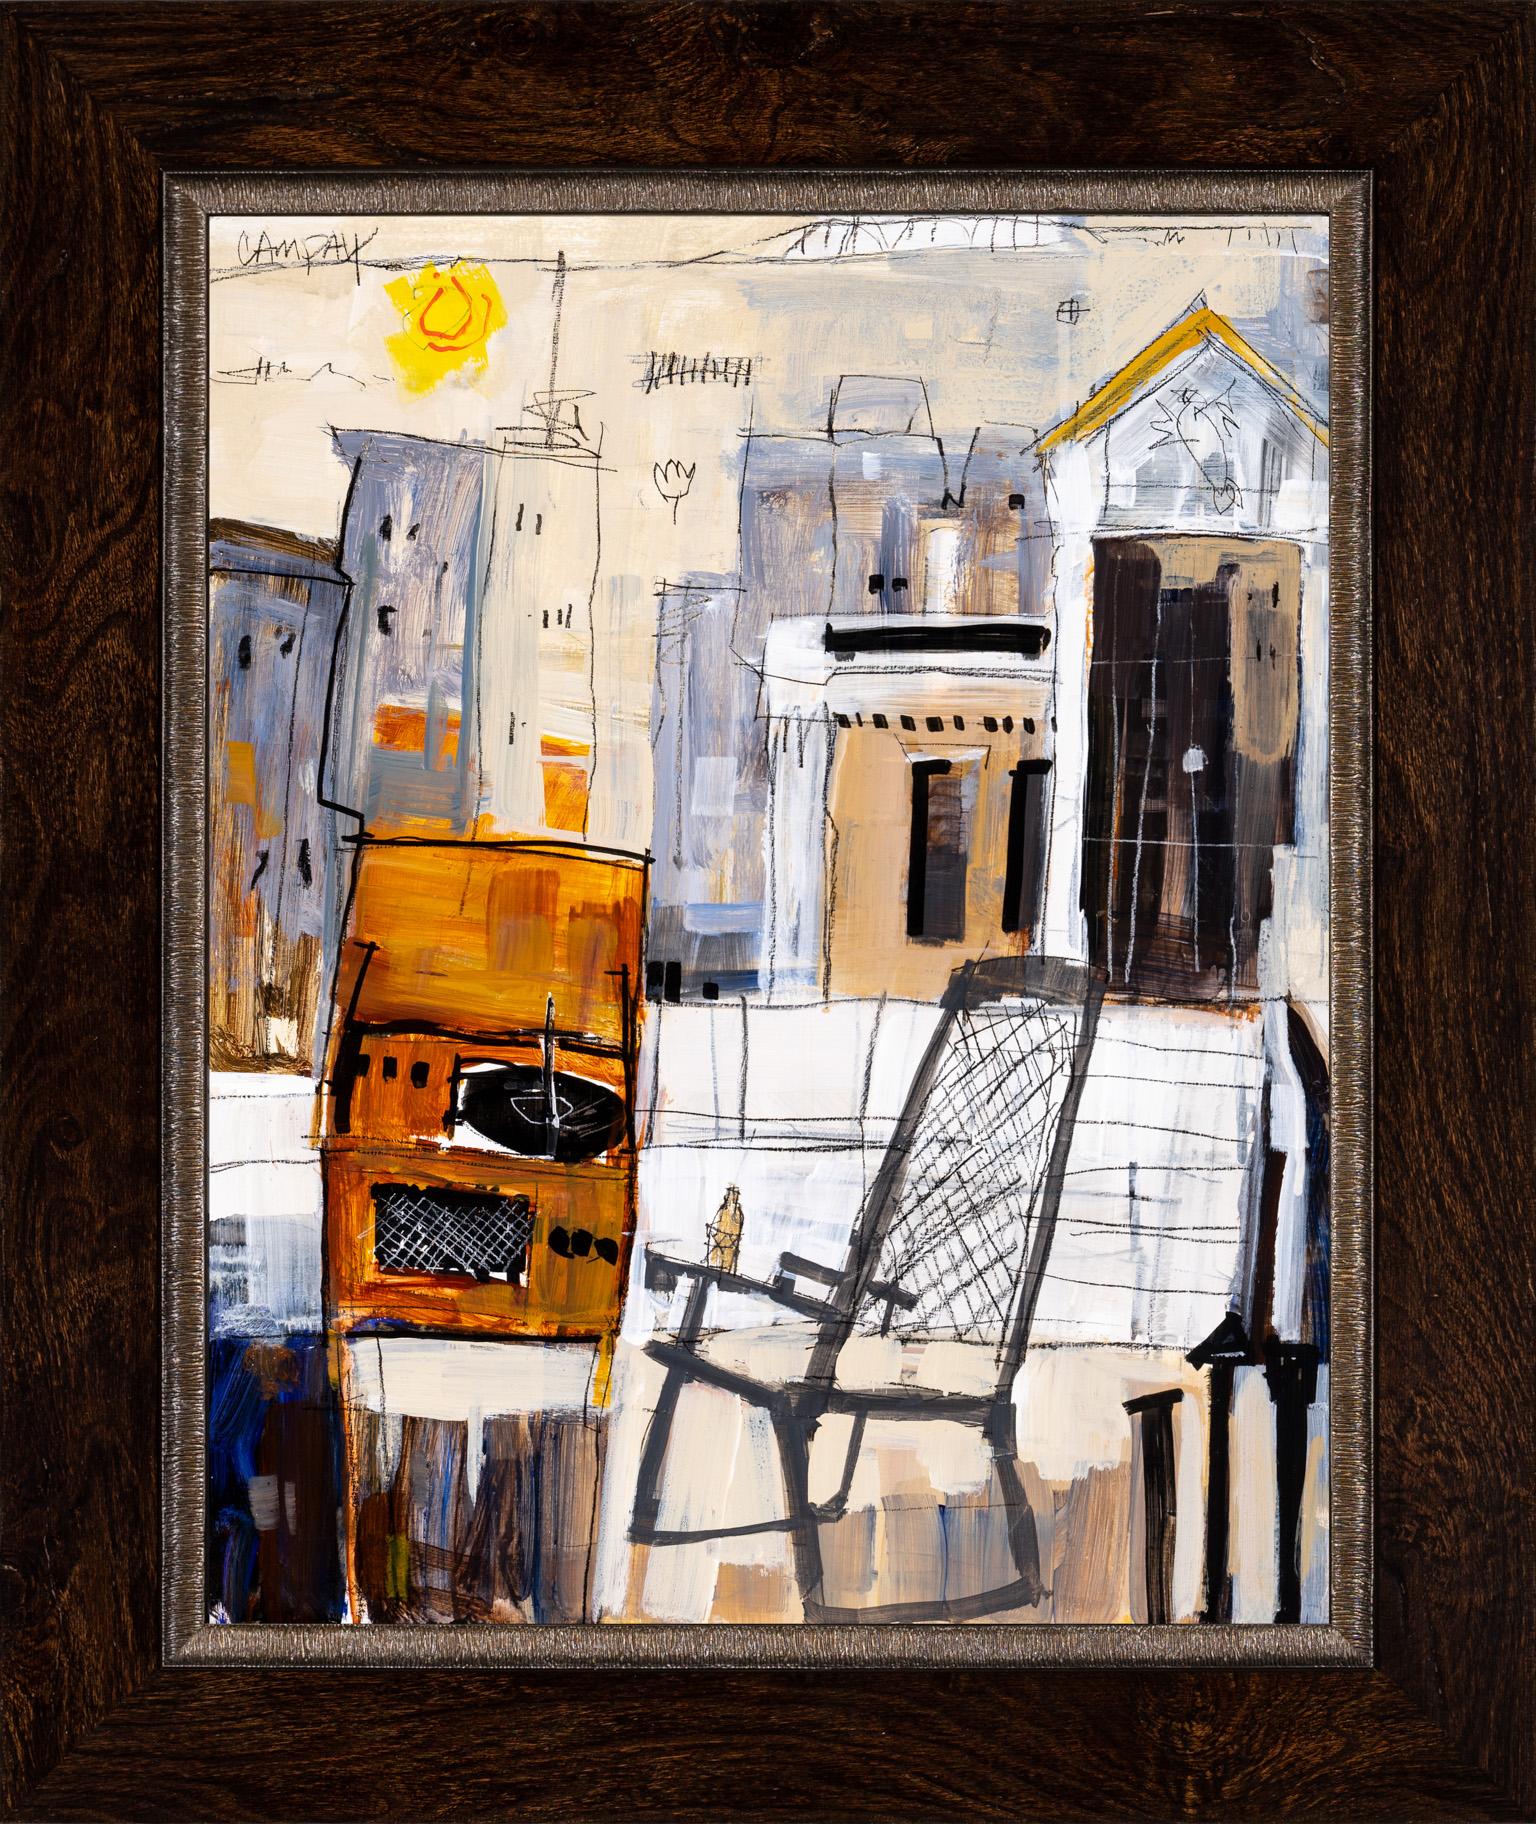 Dennis Campay Abstract Painting - "Jazz Flavors" Loosely Painted Outdoor Scene with Record Player and Cityscape